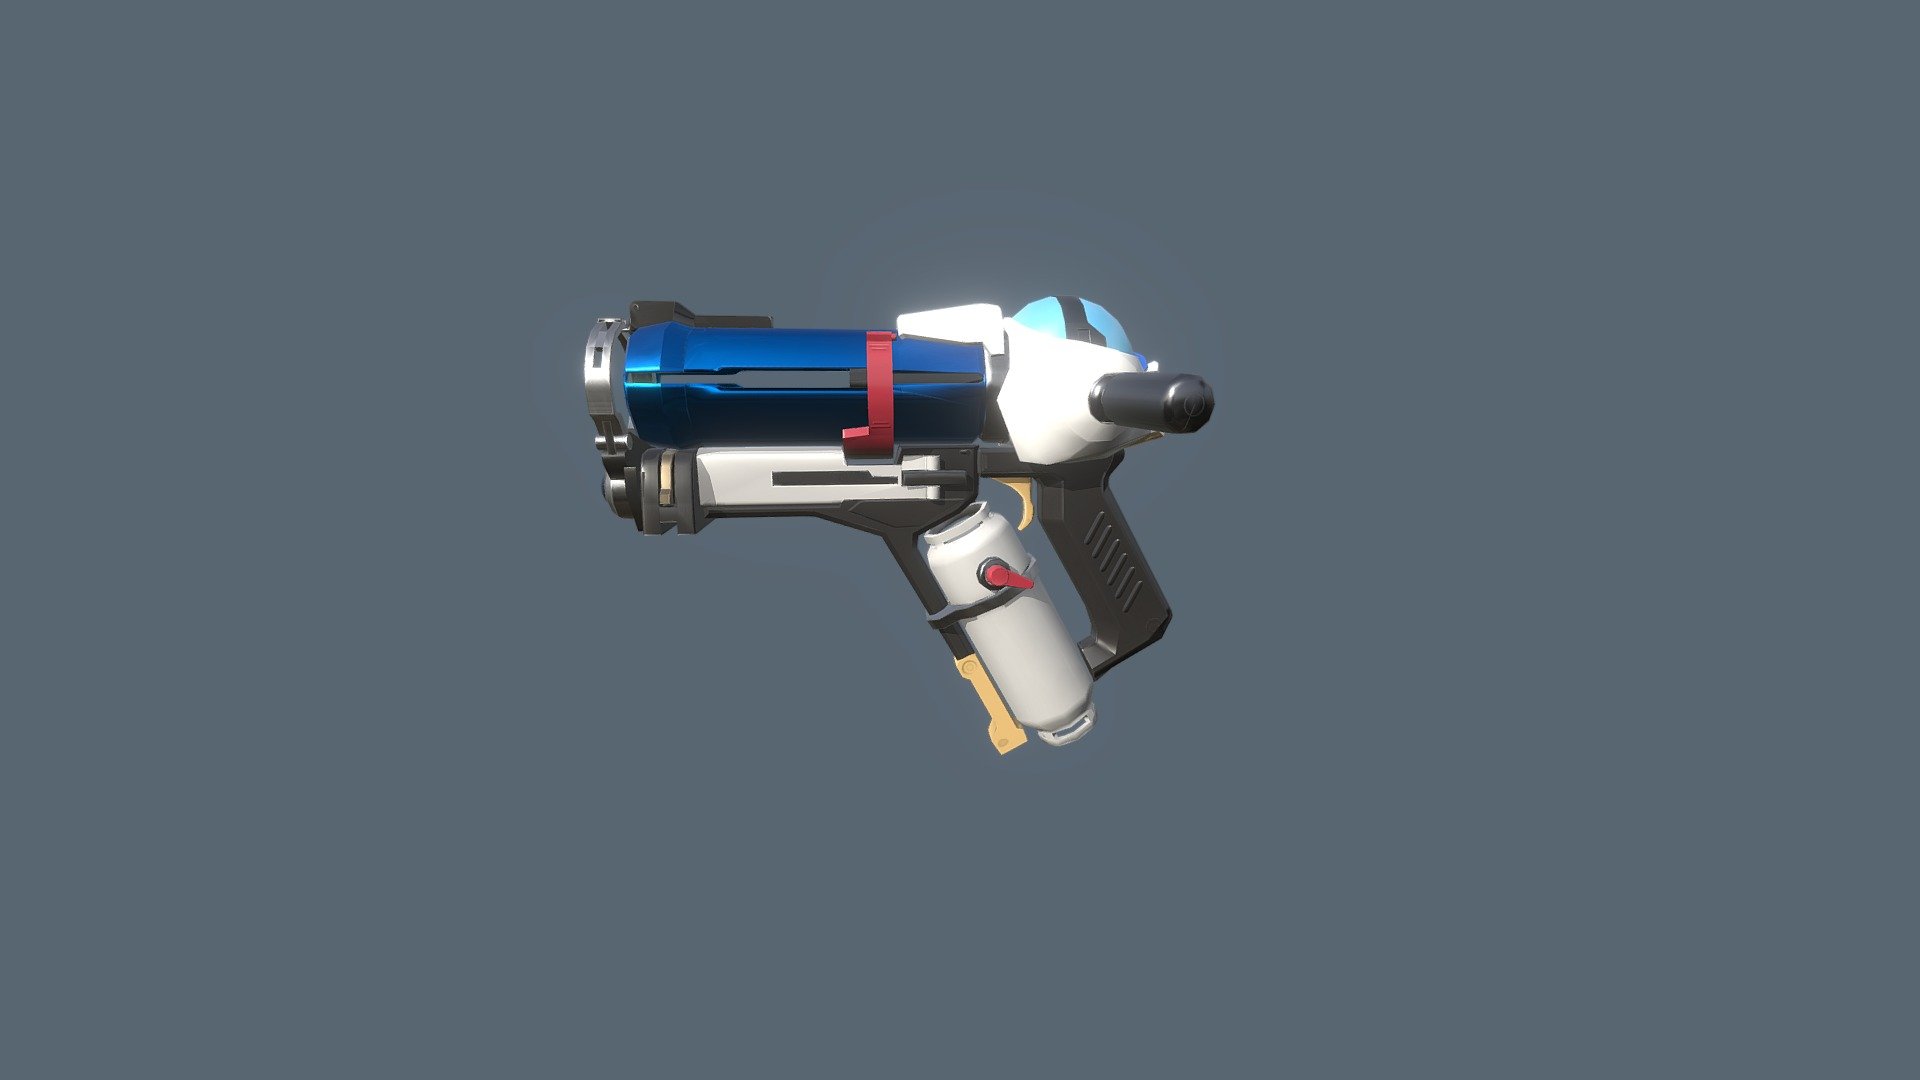 Lod 0 version of Mei's Endothermic Ice Blaster (4800 tri limit)

Modified just a little - Mei's Endothermic Blaster - 3D model by doggydreamland 3d model